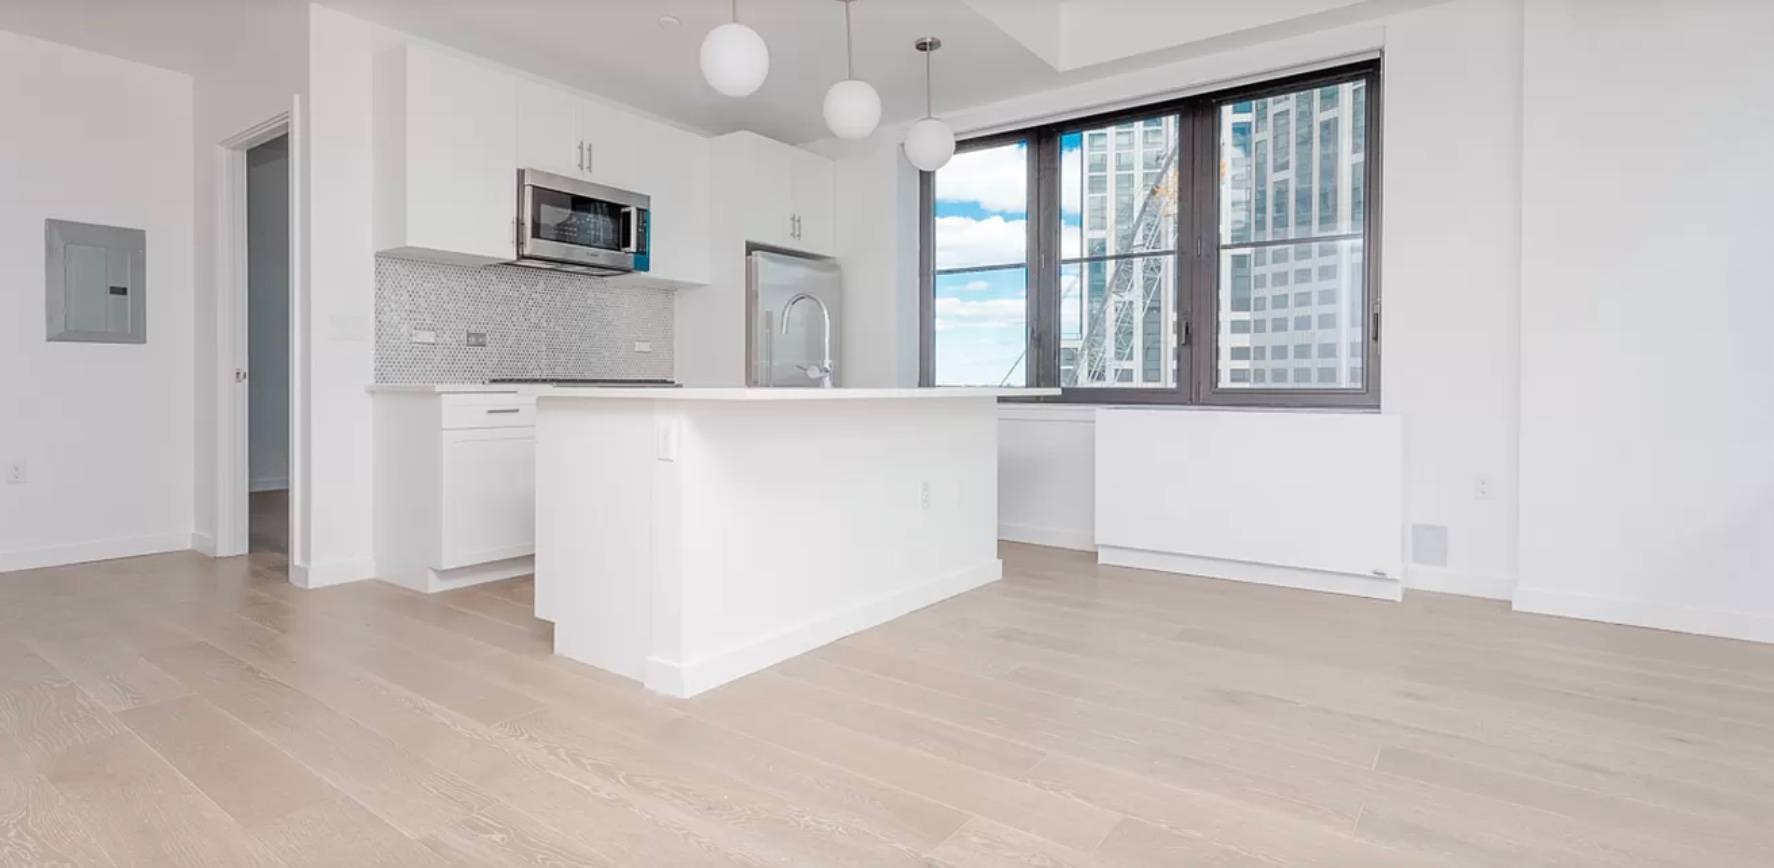 No Fee, 1 Bed / 1 Bath Apartment in Luxury Downtown Brooklyn Building